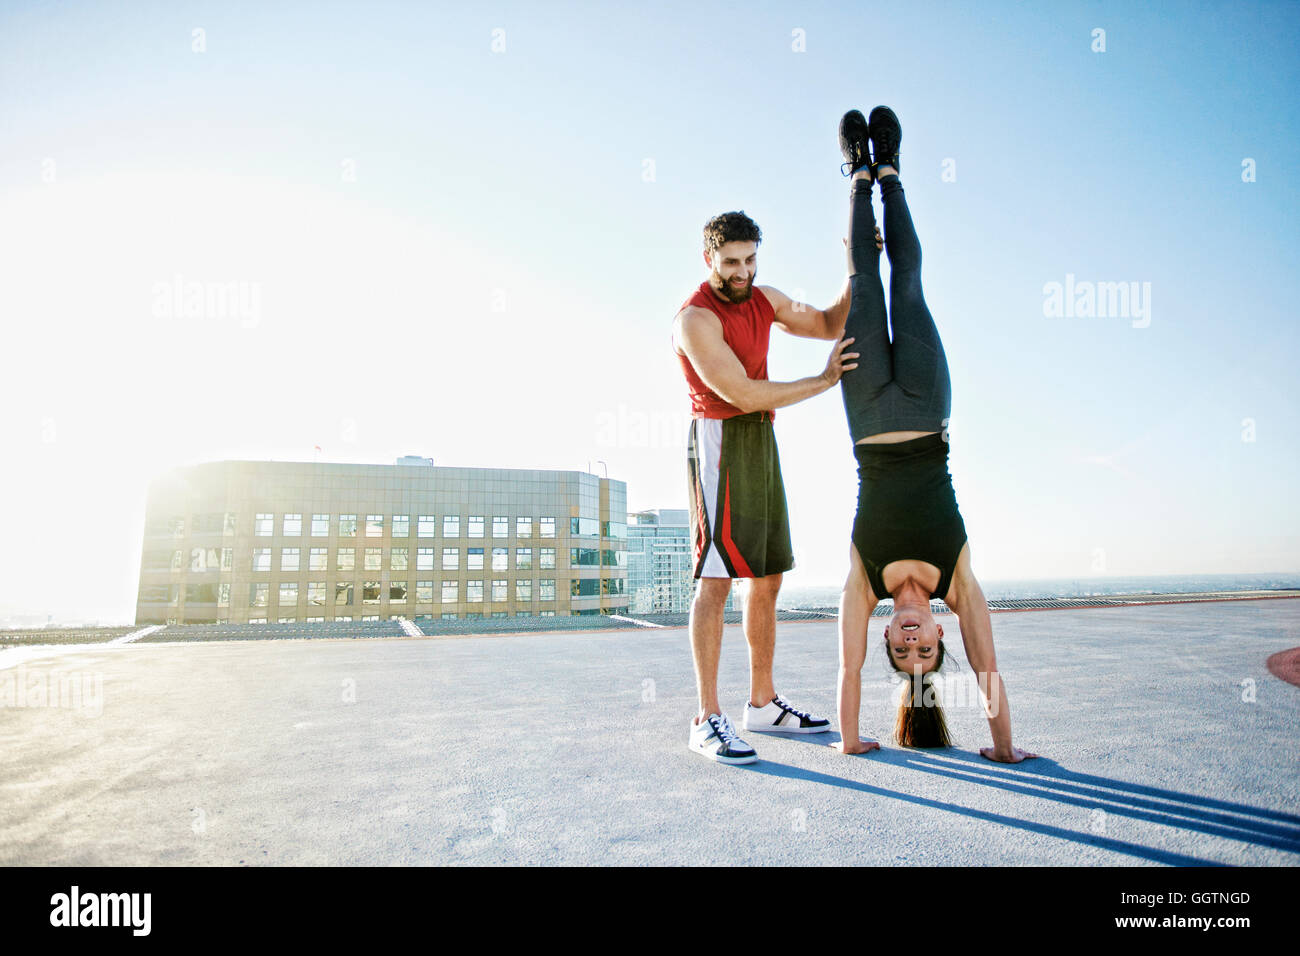 Caucasian man helping woman do handstand on urban rooftop Banque D'Images